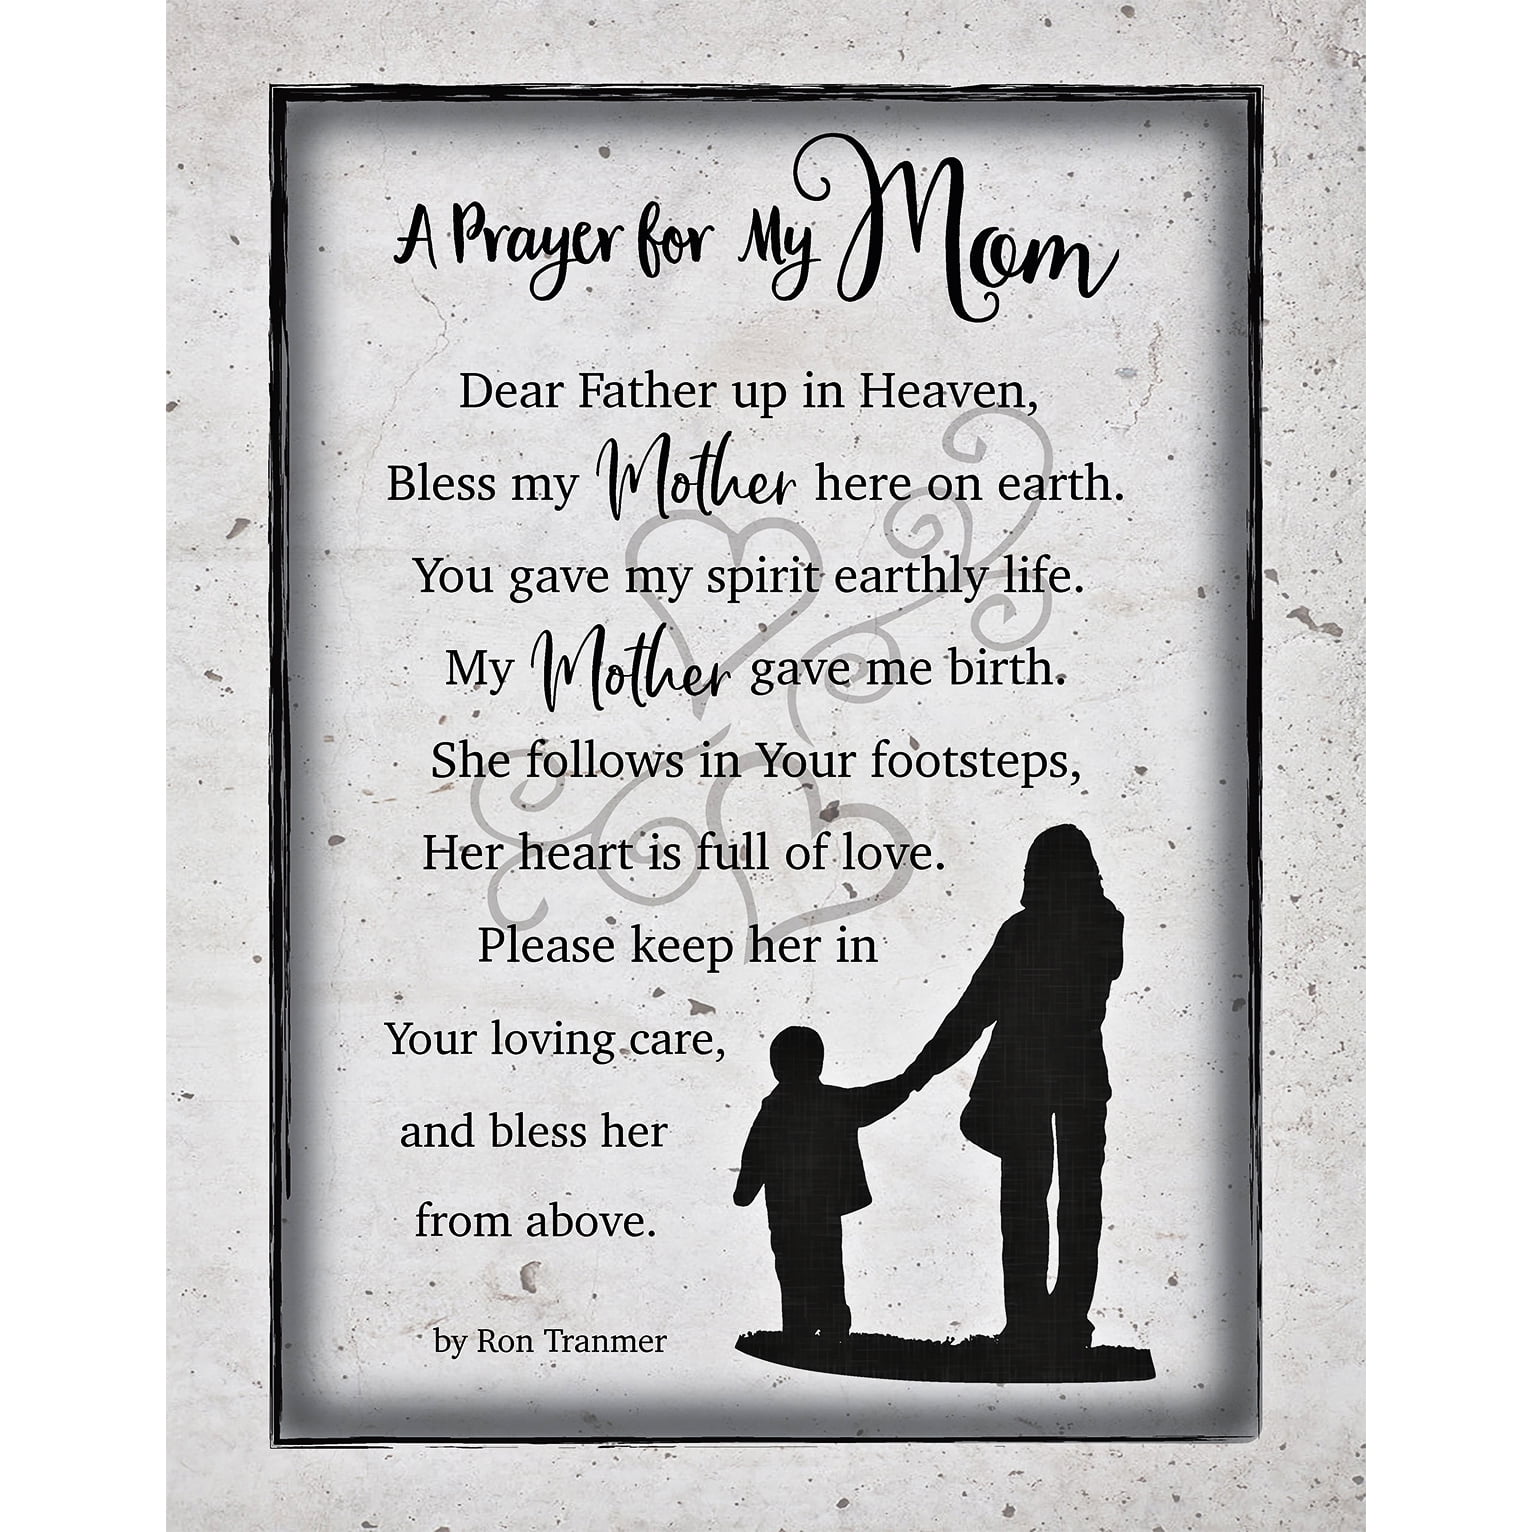 Mom Mother Prayer Wood Plaque with Inspiring Quotes 11.75"x15" - Classy